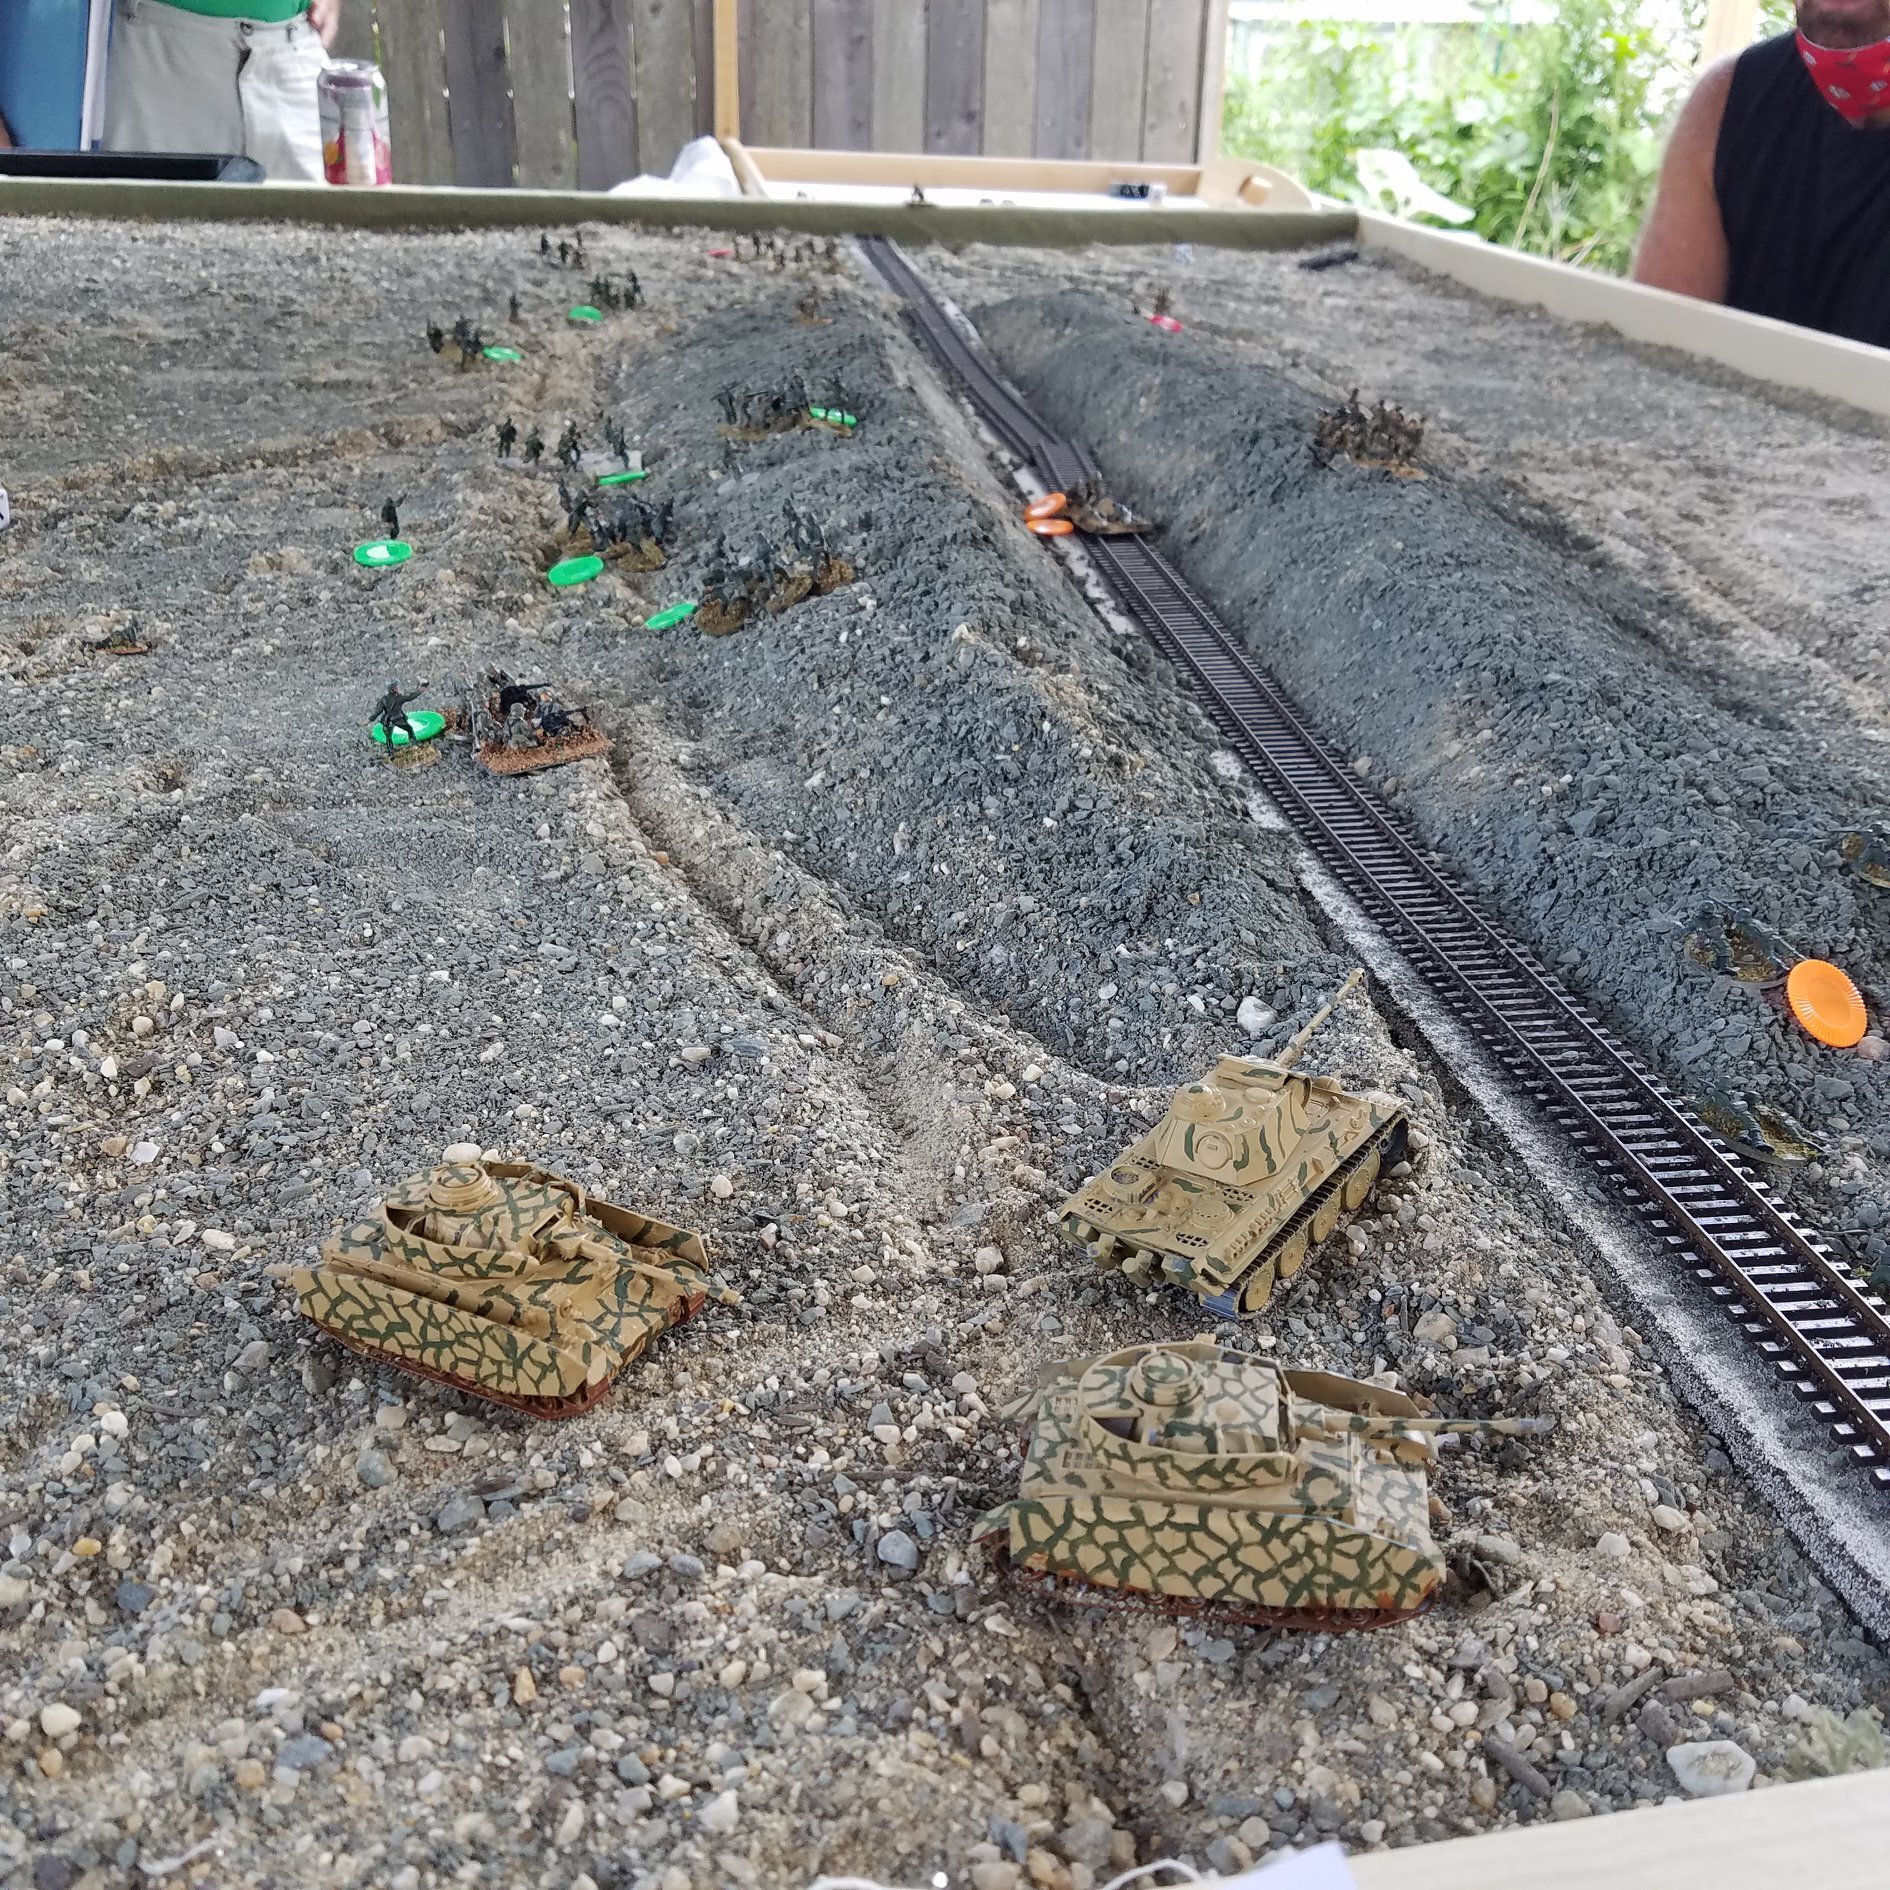 With the left flank of the Guards wiped out, Panzer Ivs and Panthers take control of the railroad cut, however, heavy German losses made it only a tactical victory.